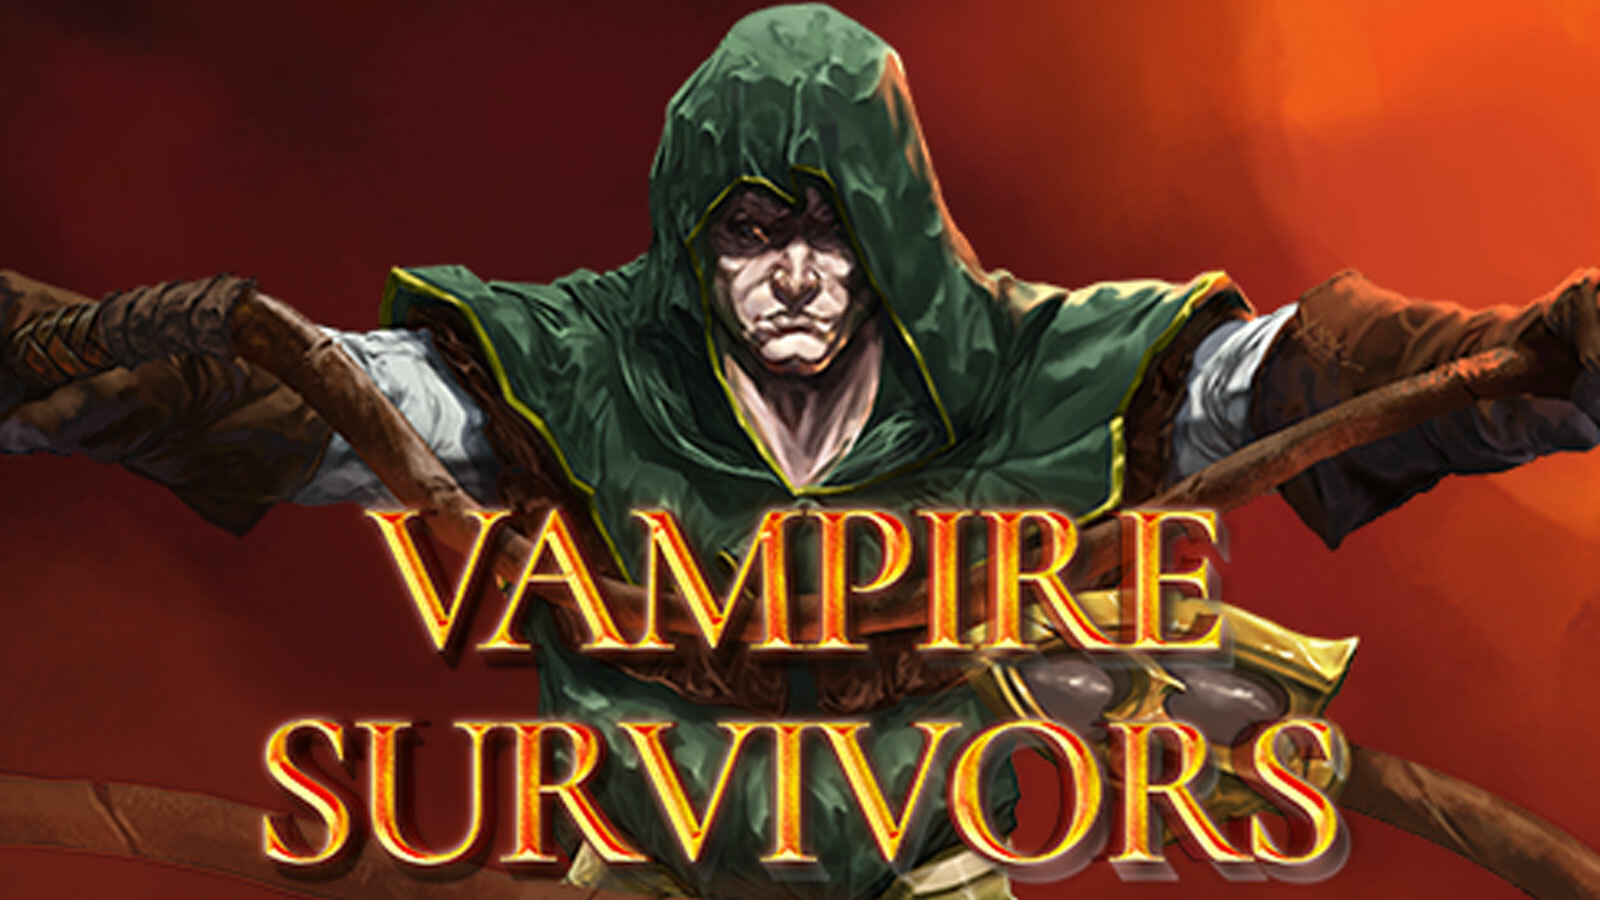 Vampire Survivors beats out Elden Ring and God of War to score